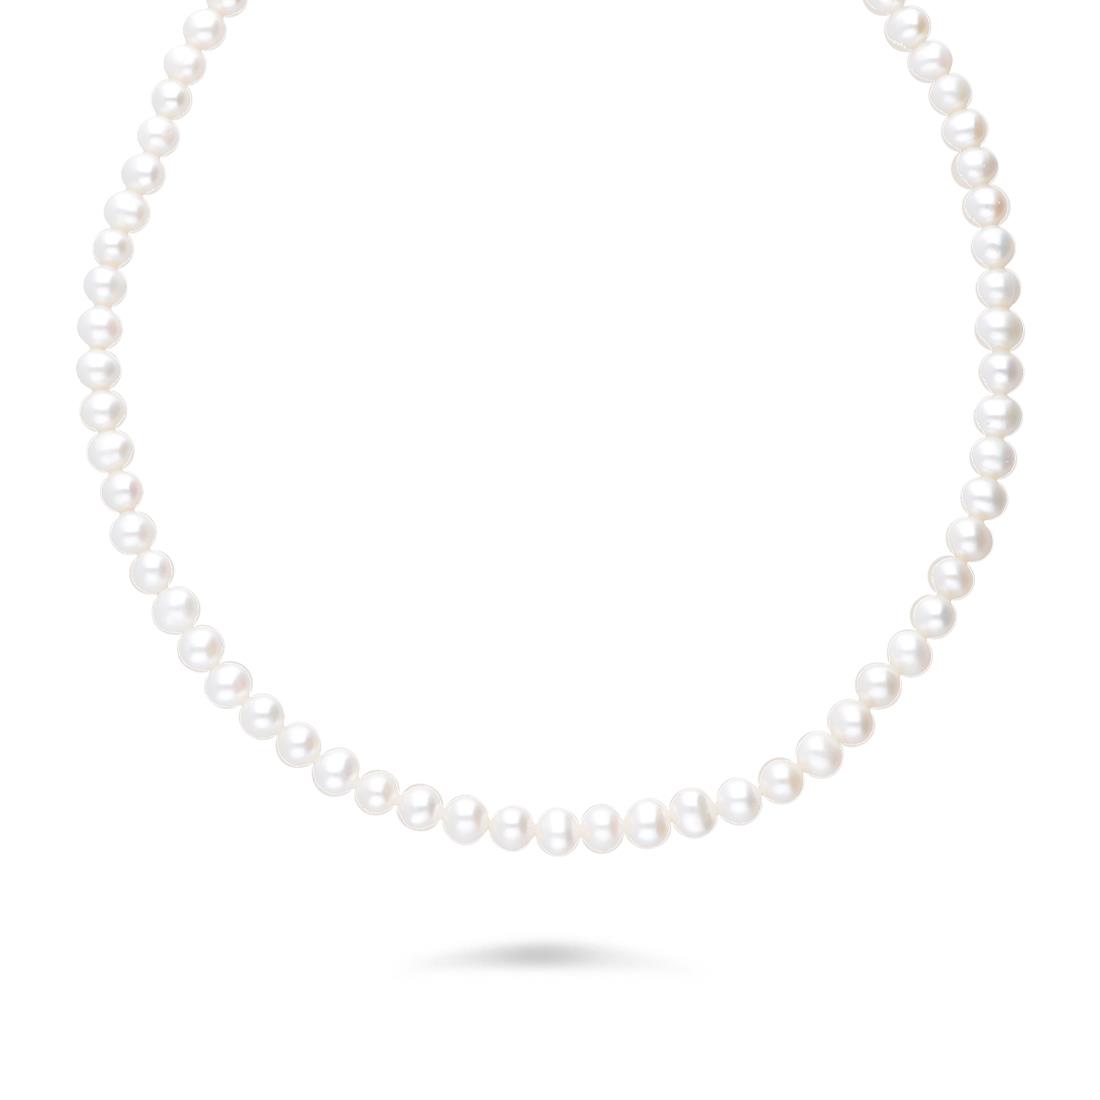 Silver necklace with pearls - MAYUMI